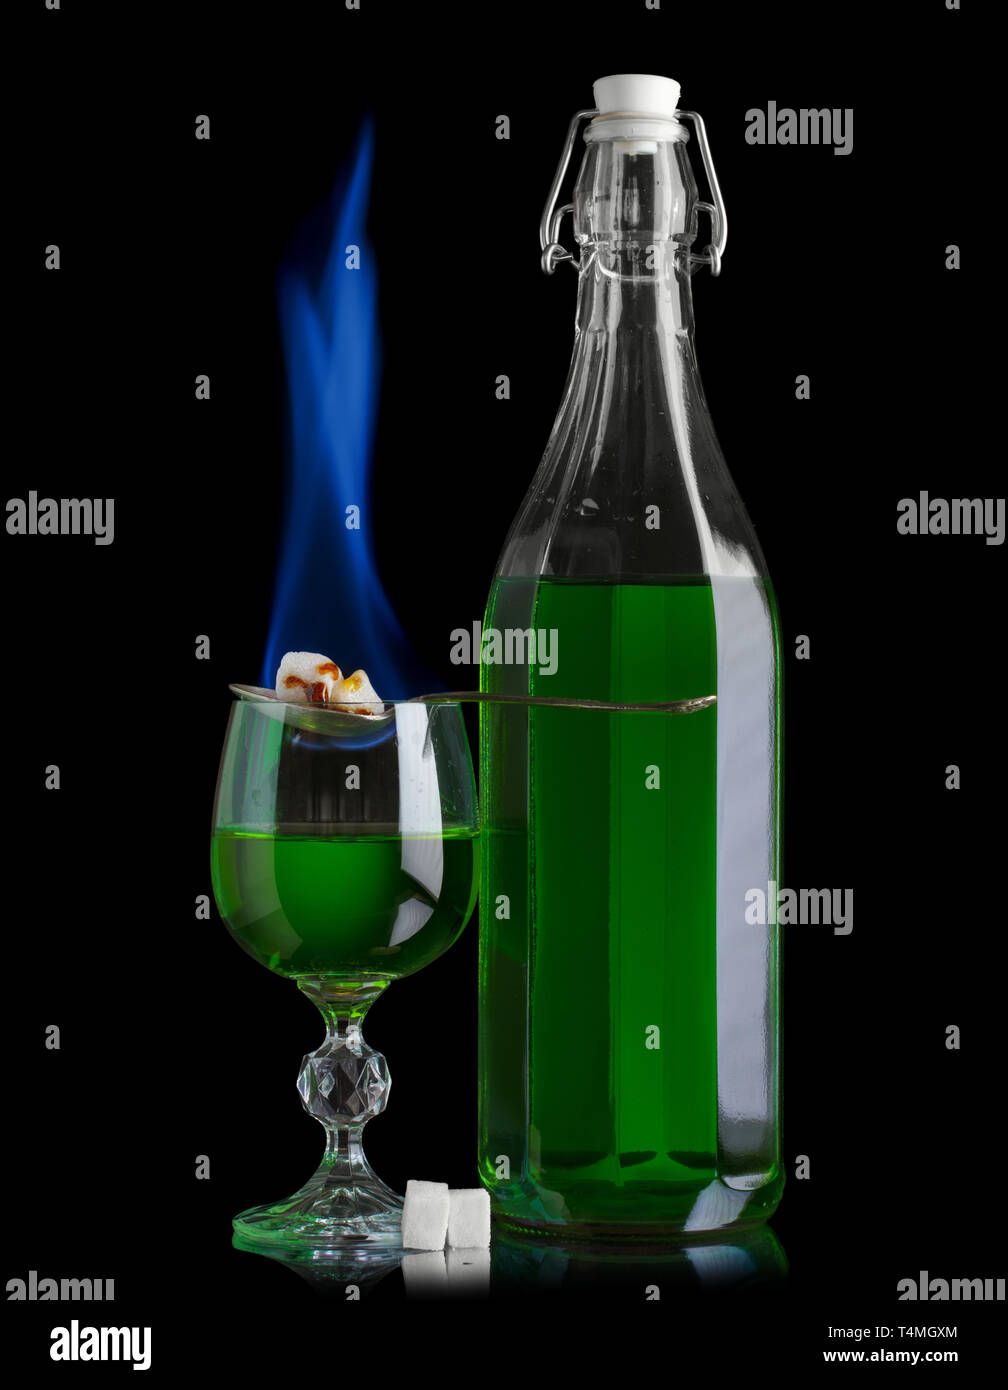 Absinthe bottle and glass with lump sugar burning Stock Photo